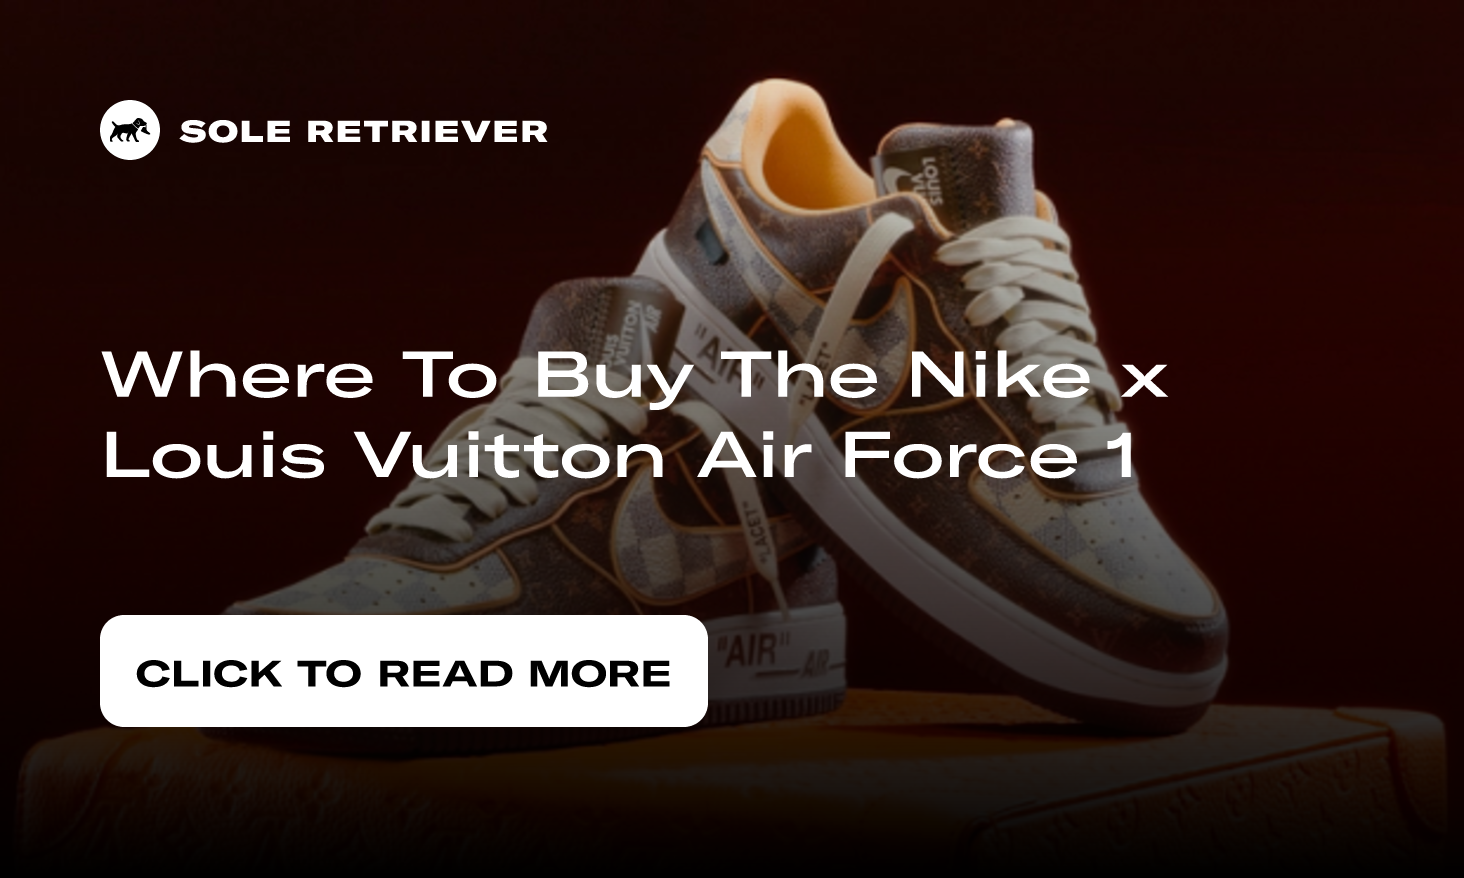 Where To Buy The Nike x Louis Vuitton Air Force 1